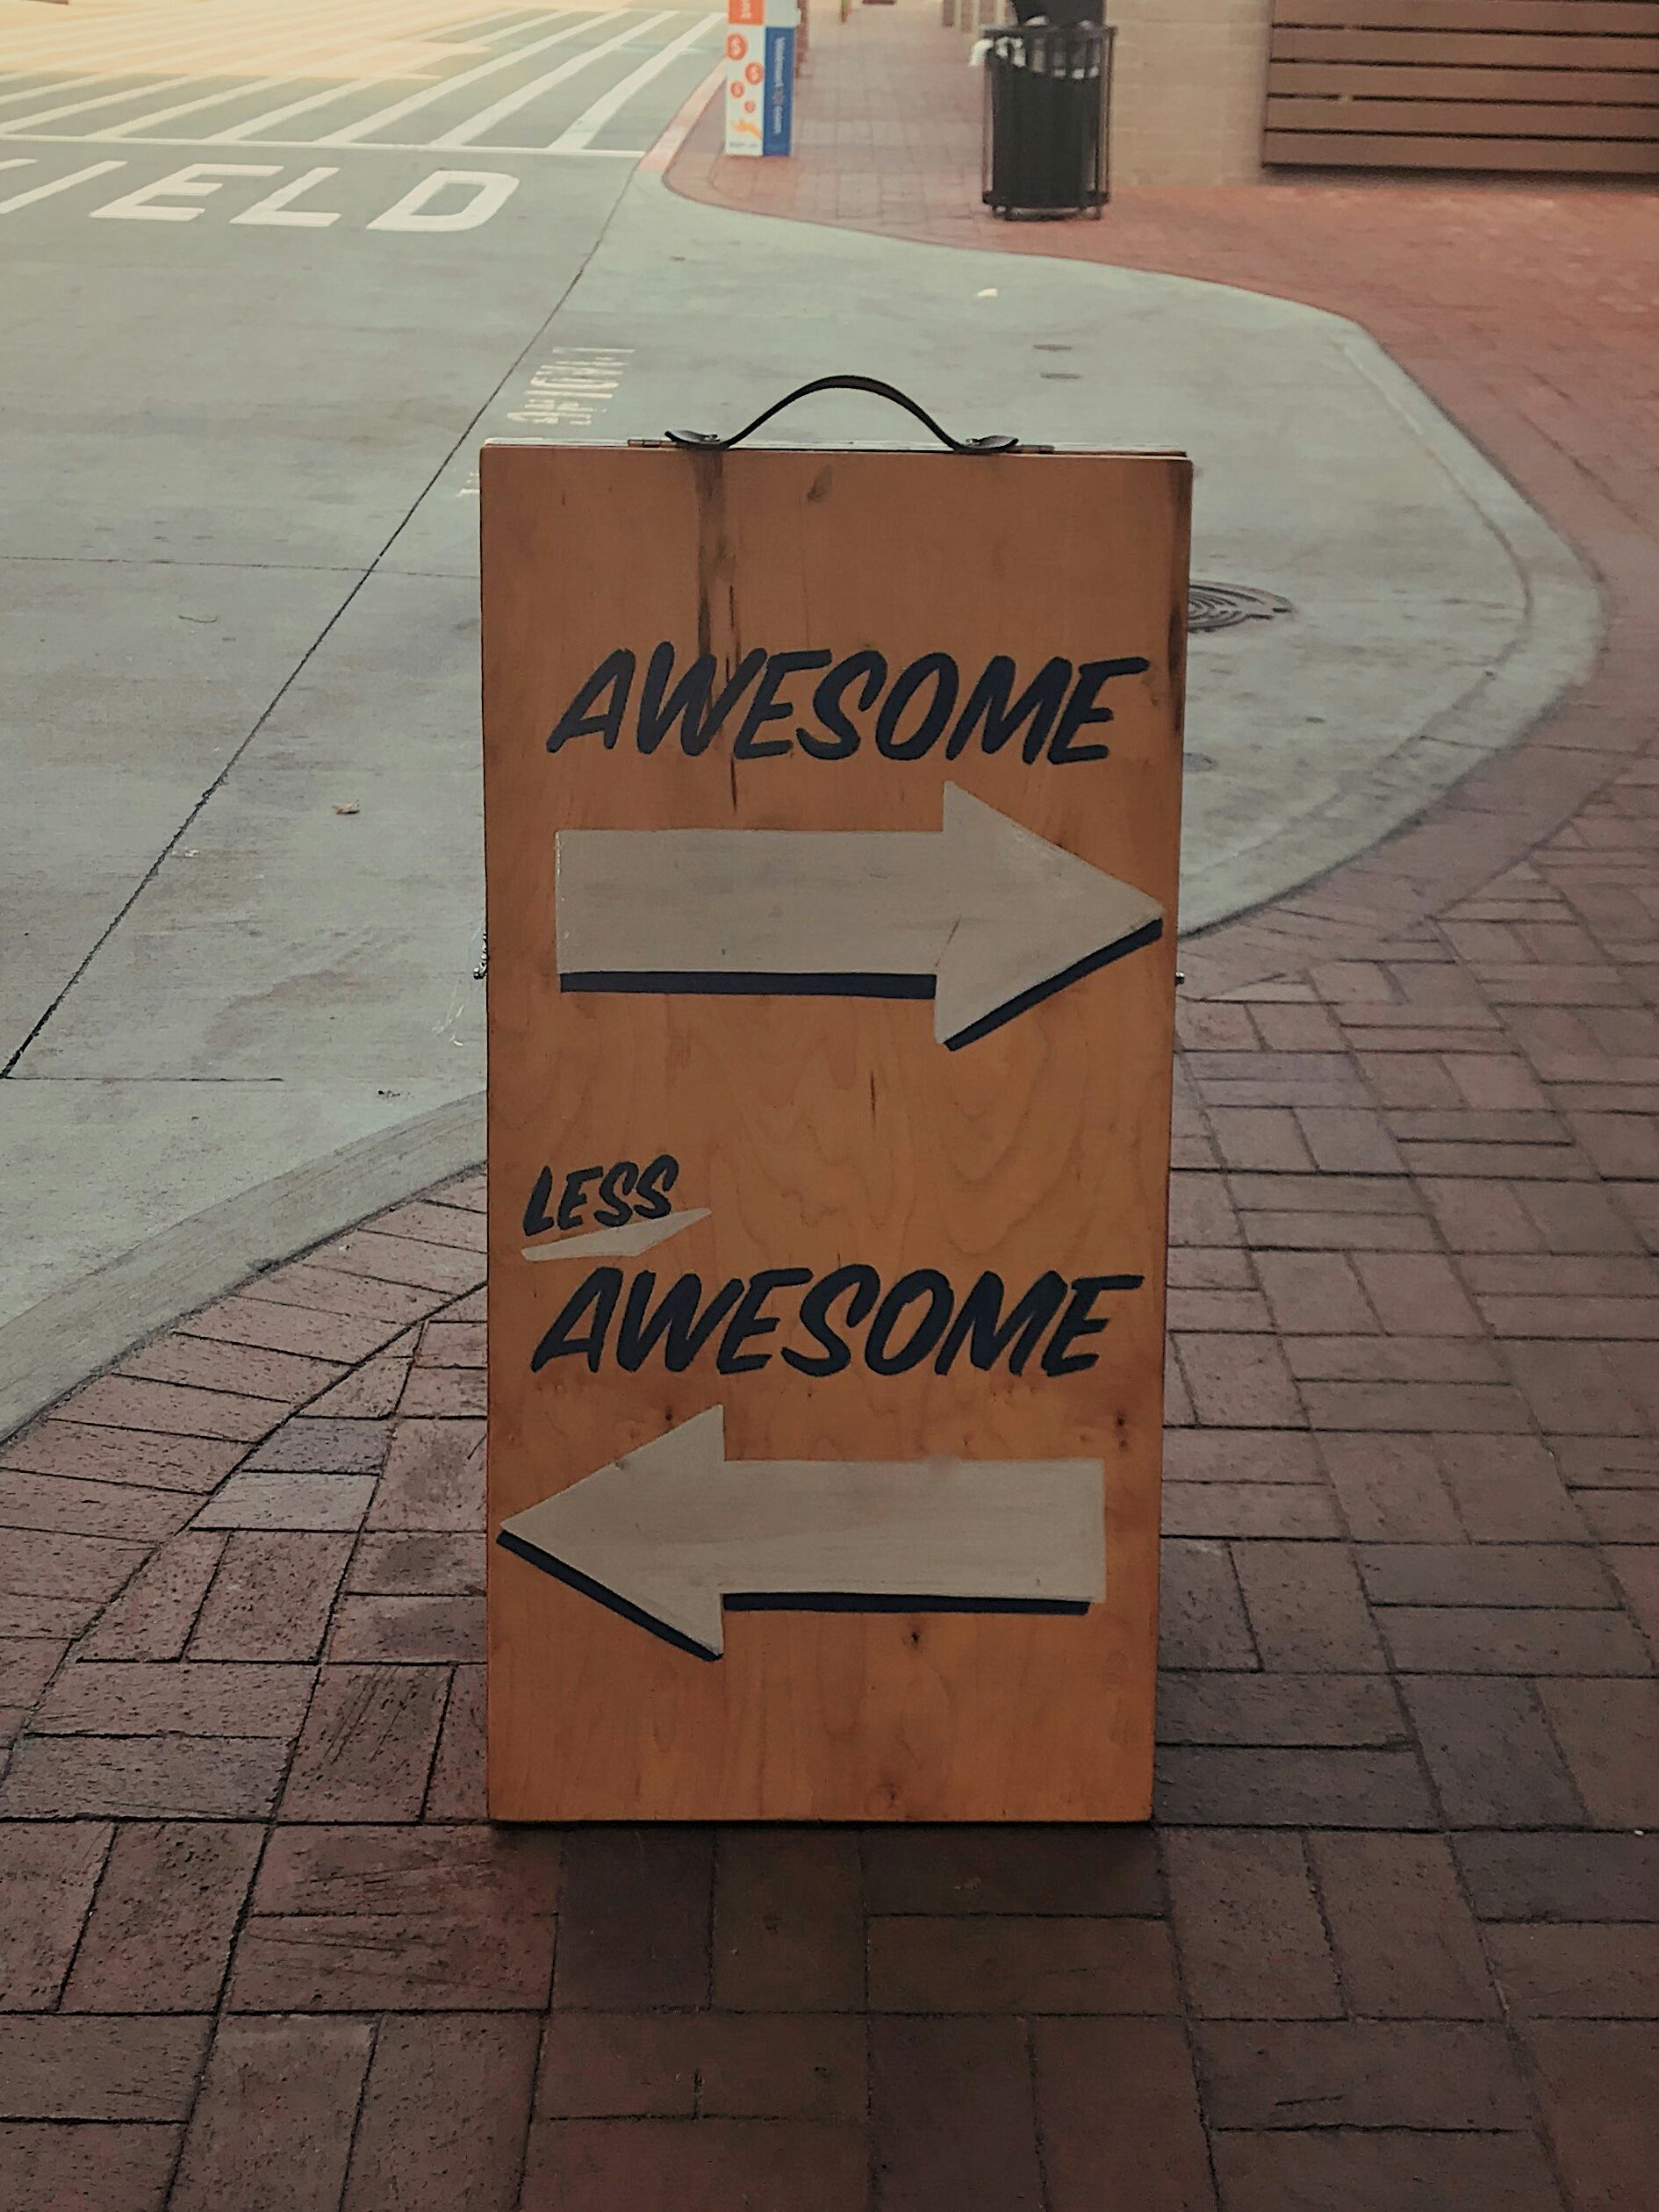 On a brick side walk, a sign has two arrows pointing in opposite directions. One arrow says "Awesome". One arrow says "Less Awesome". 